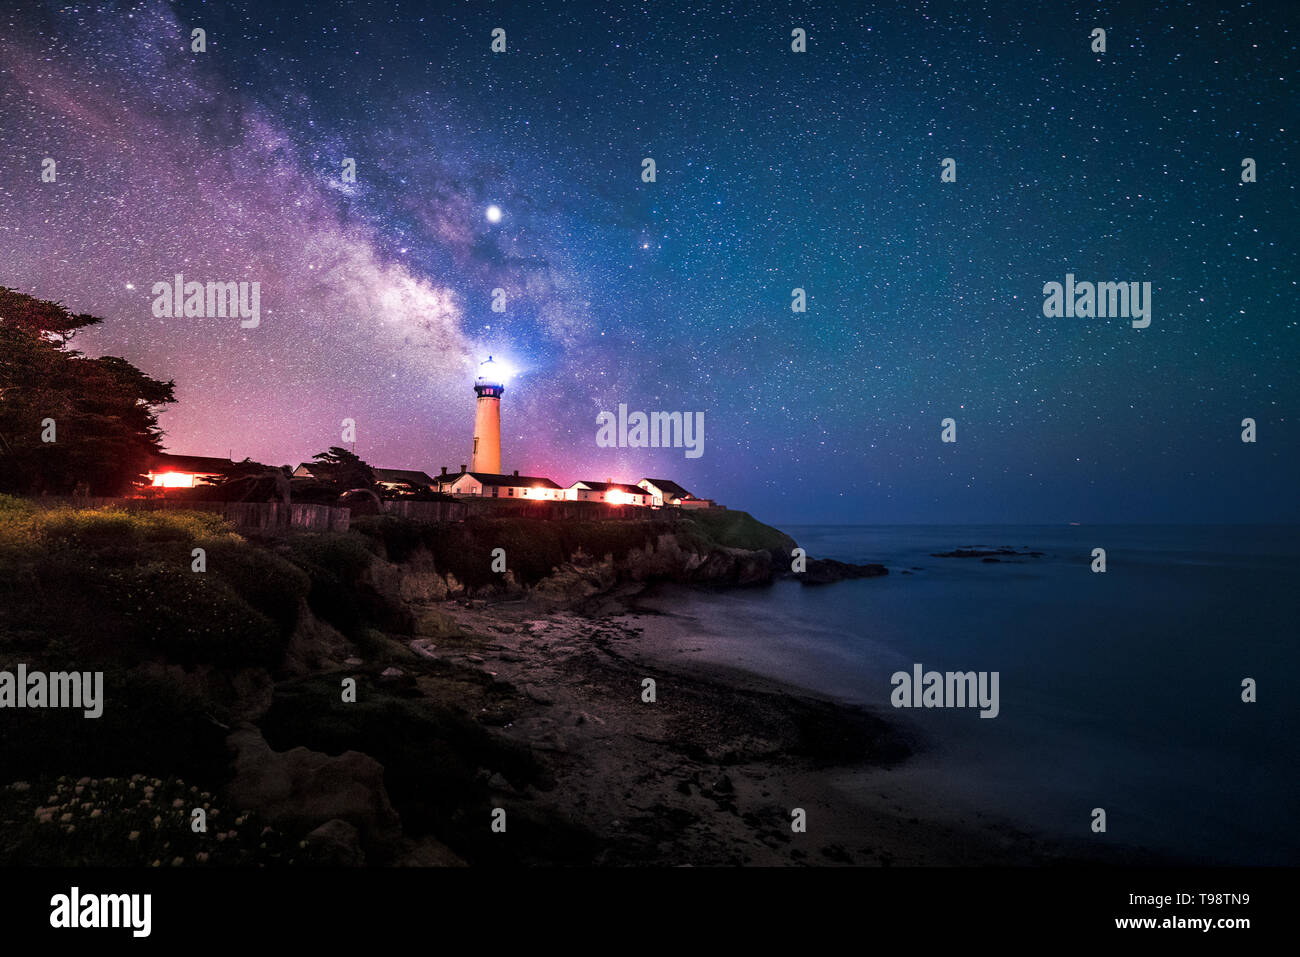 Starry night and Milky Way at Pigeon Point Lighthouse, Pescadero, California, USA Stock Photo